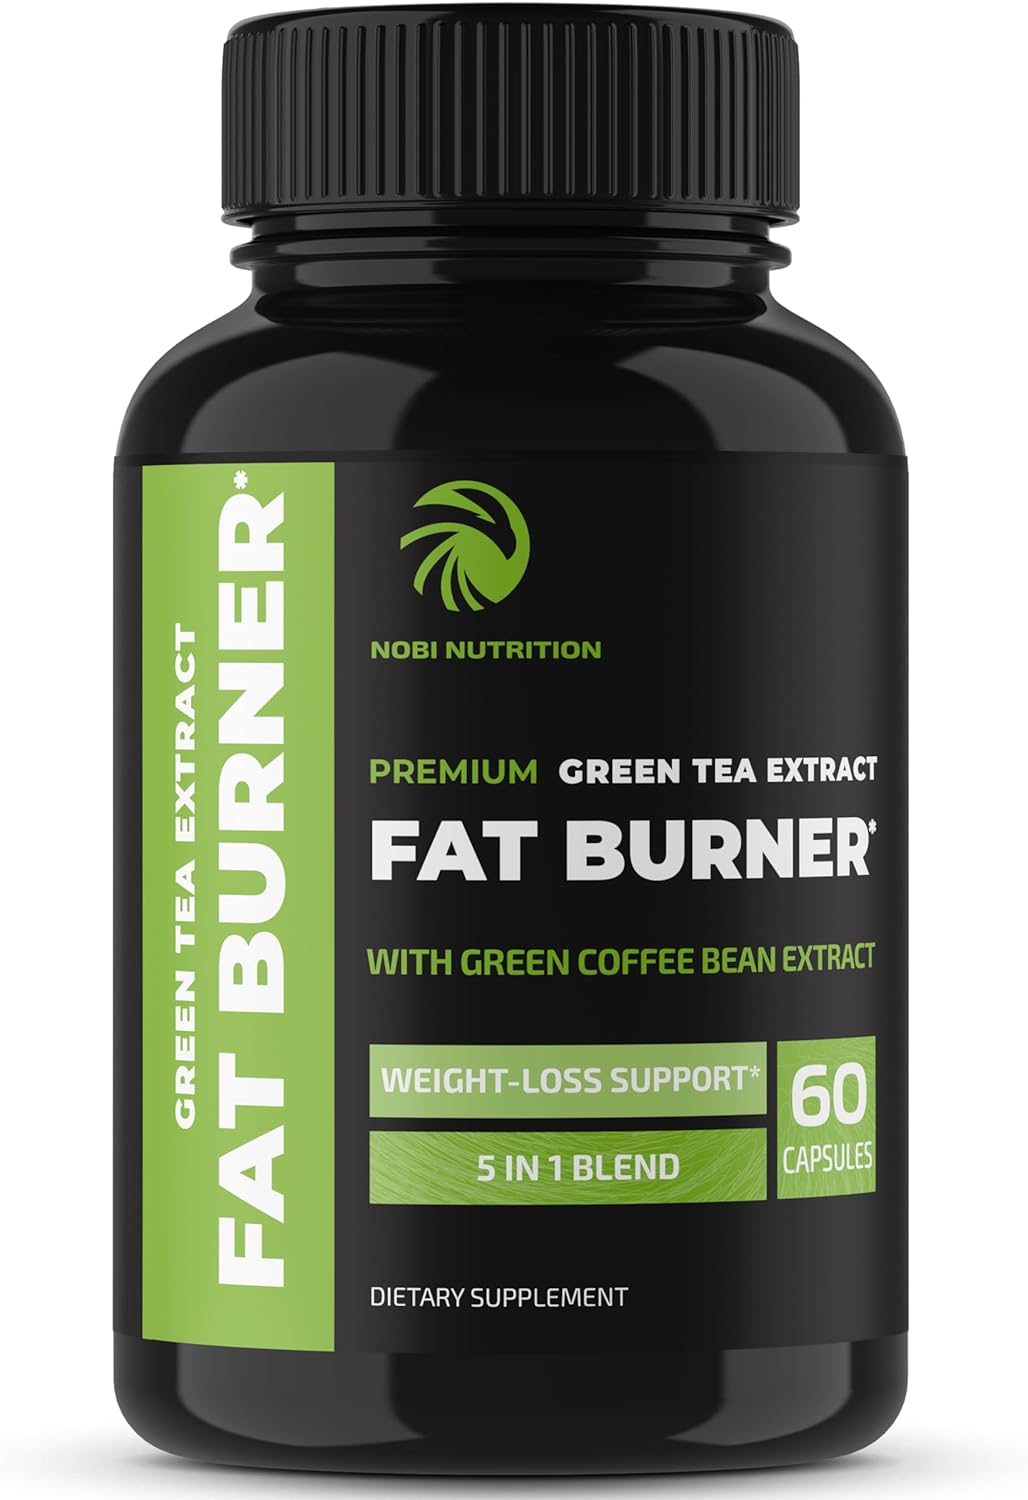 Green Tea Weight Loss Pills with Green Coffee Bean Extract | Belly Fat Burner, Metabolism Booster,  Appetite Suppressant for Women  Men | 45% EGCG | Vegan, Gluten-Free Supplement | 60 Capsules